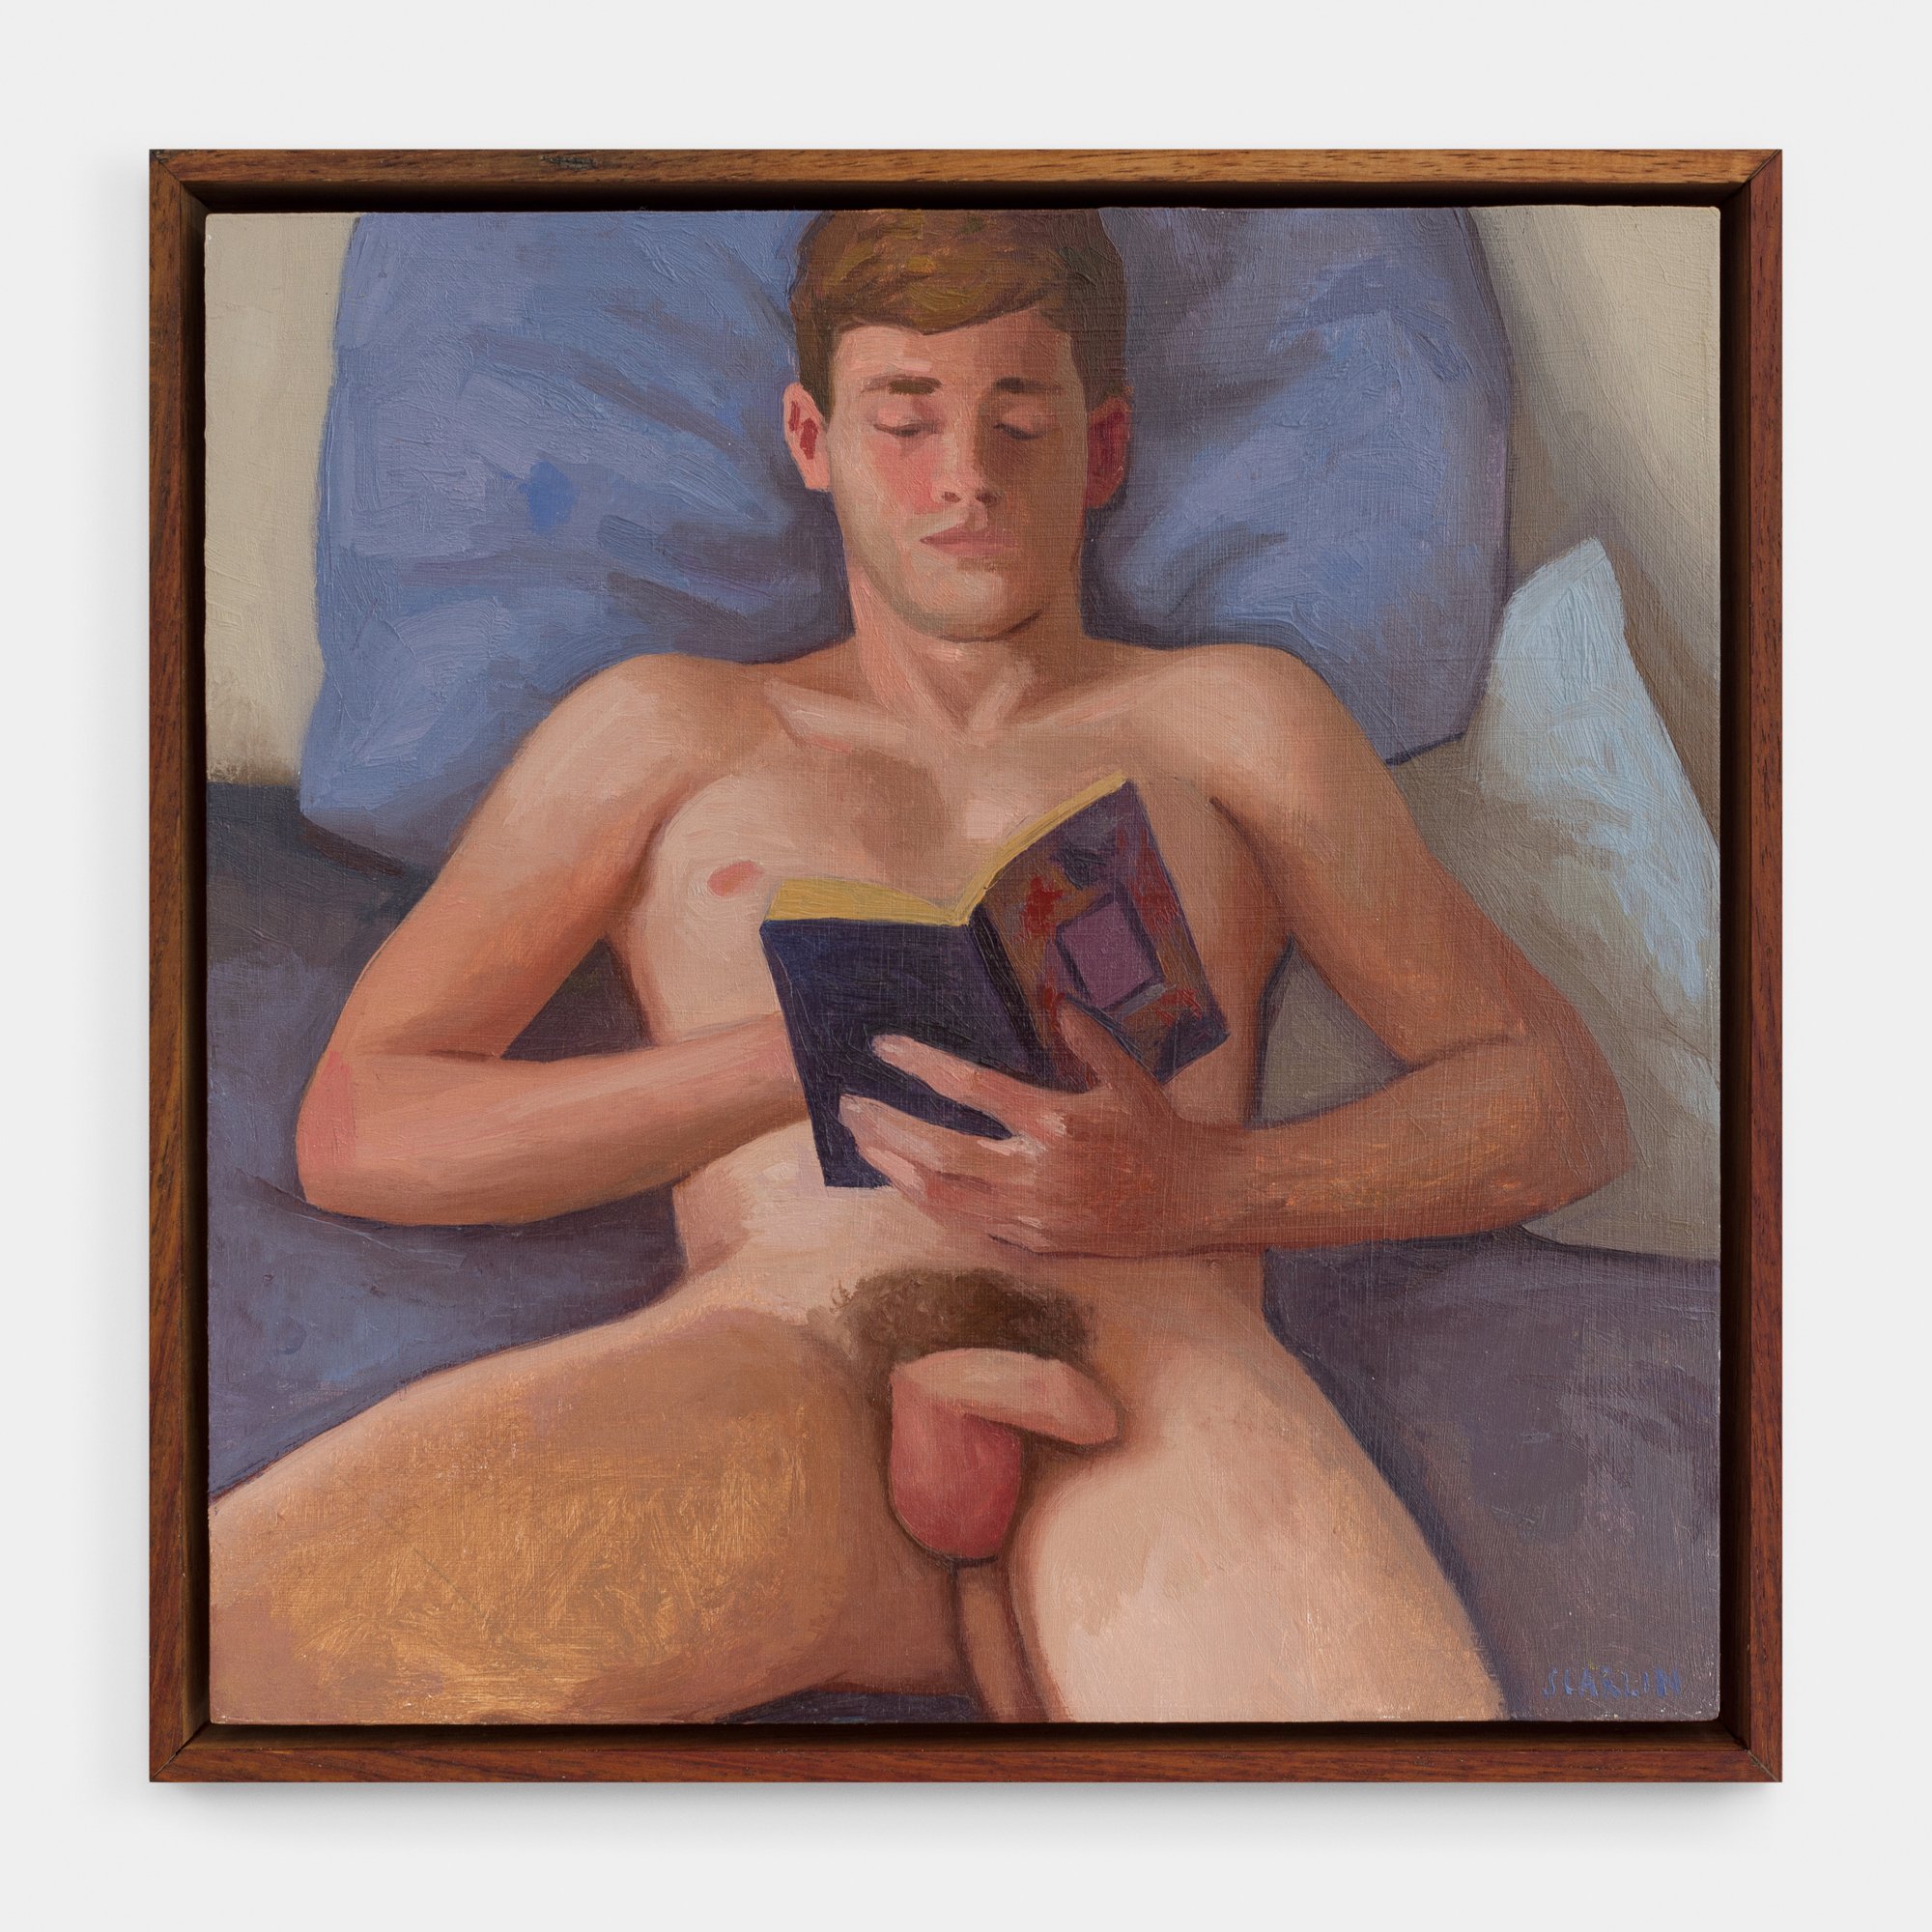  Harry Reading Armistead Maupin (2022)  Oil on panel 30 x 30cm    Private collection 